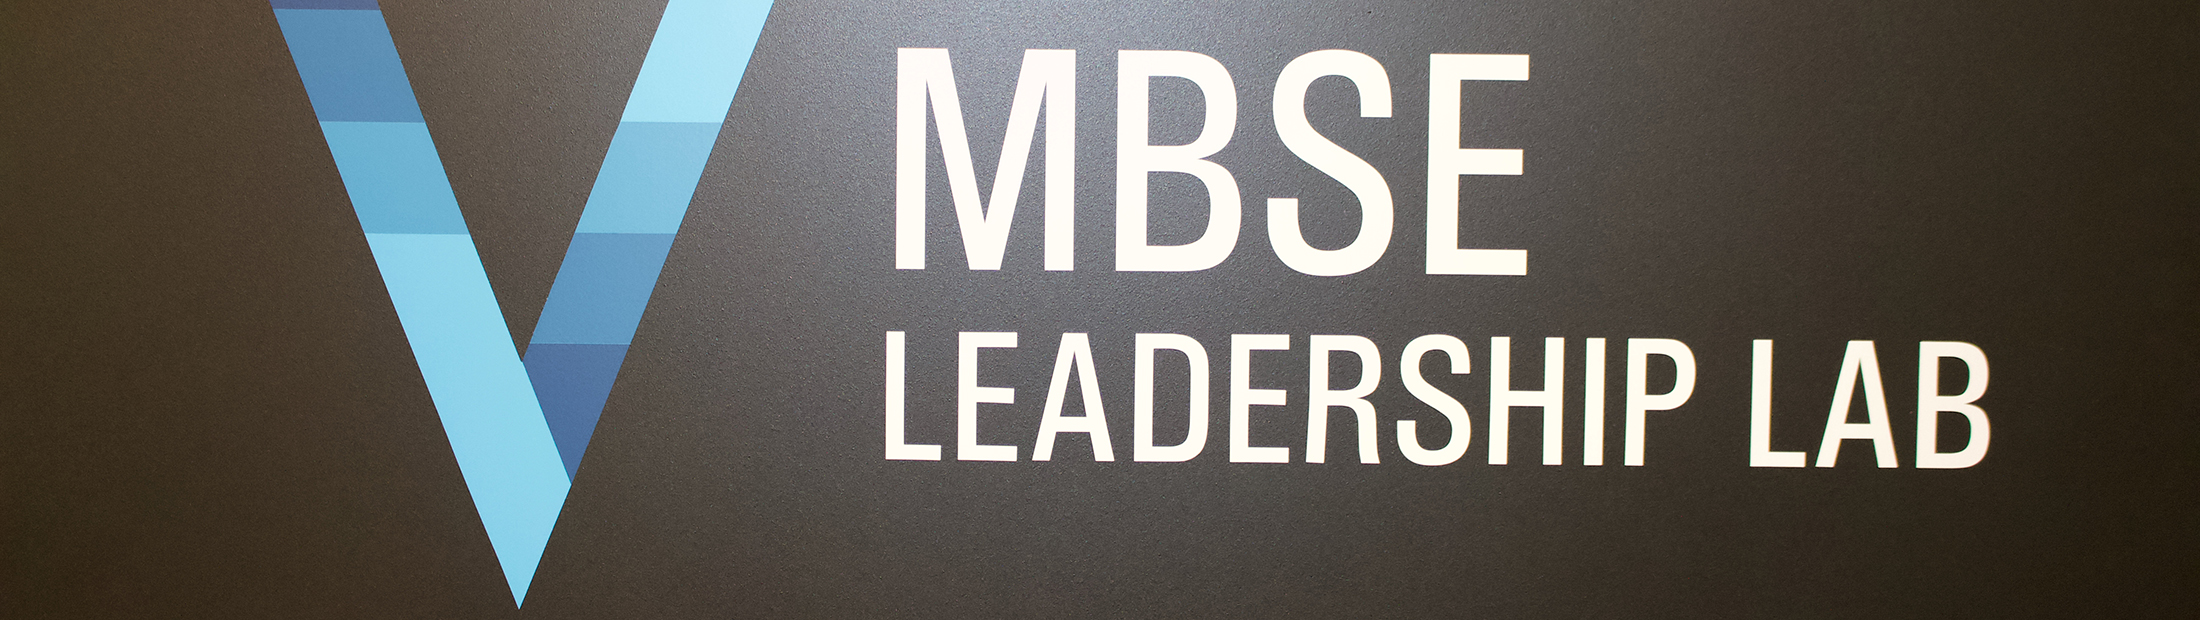 MBSE Leadership lab logo with a blue "V"